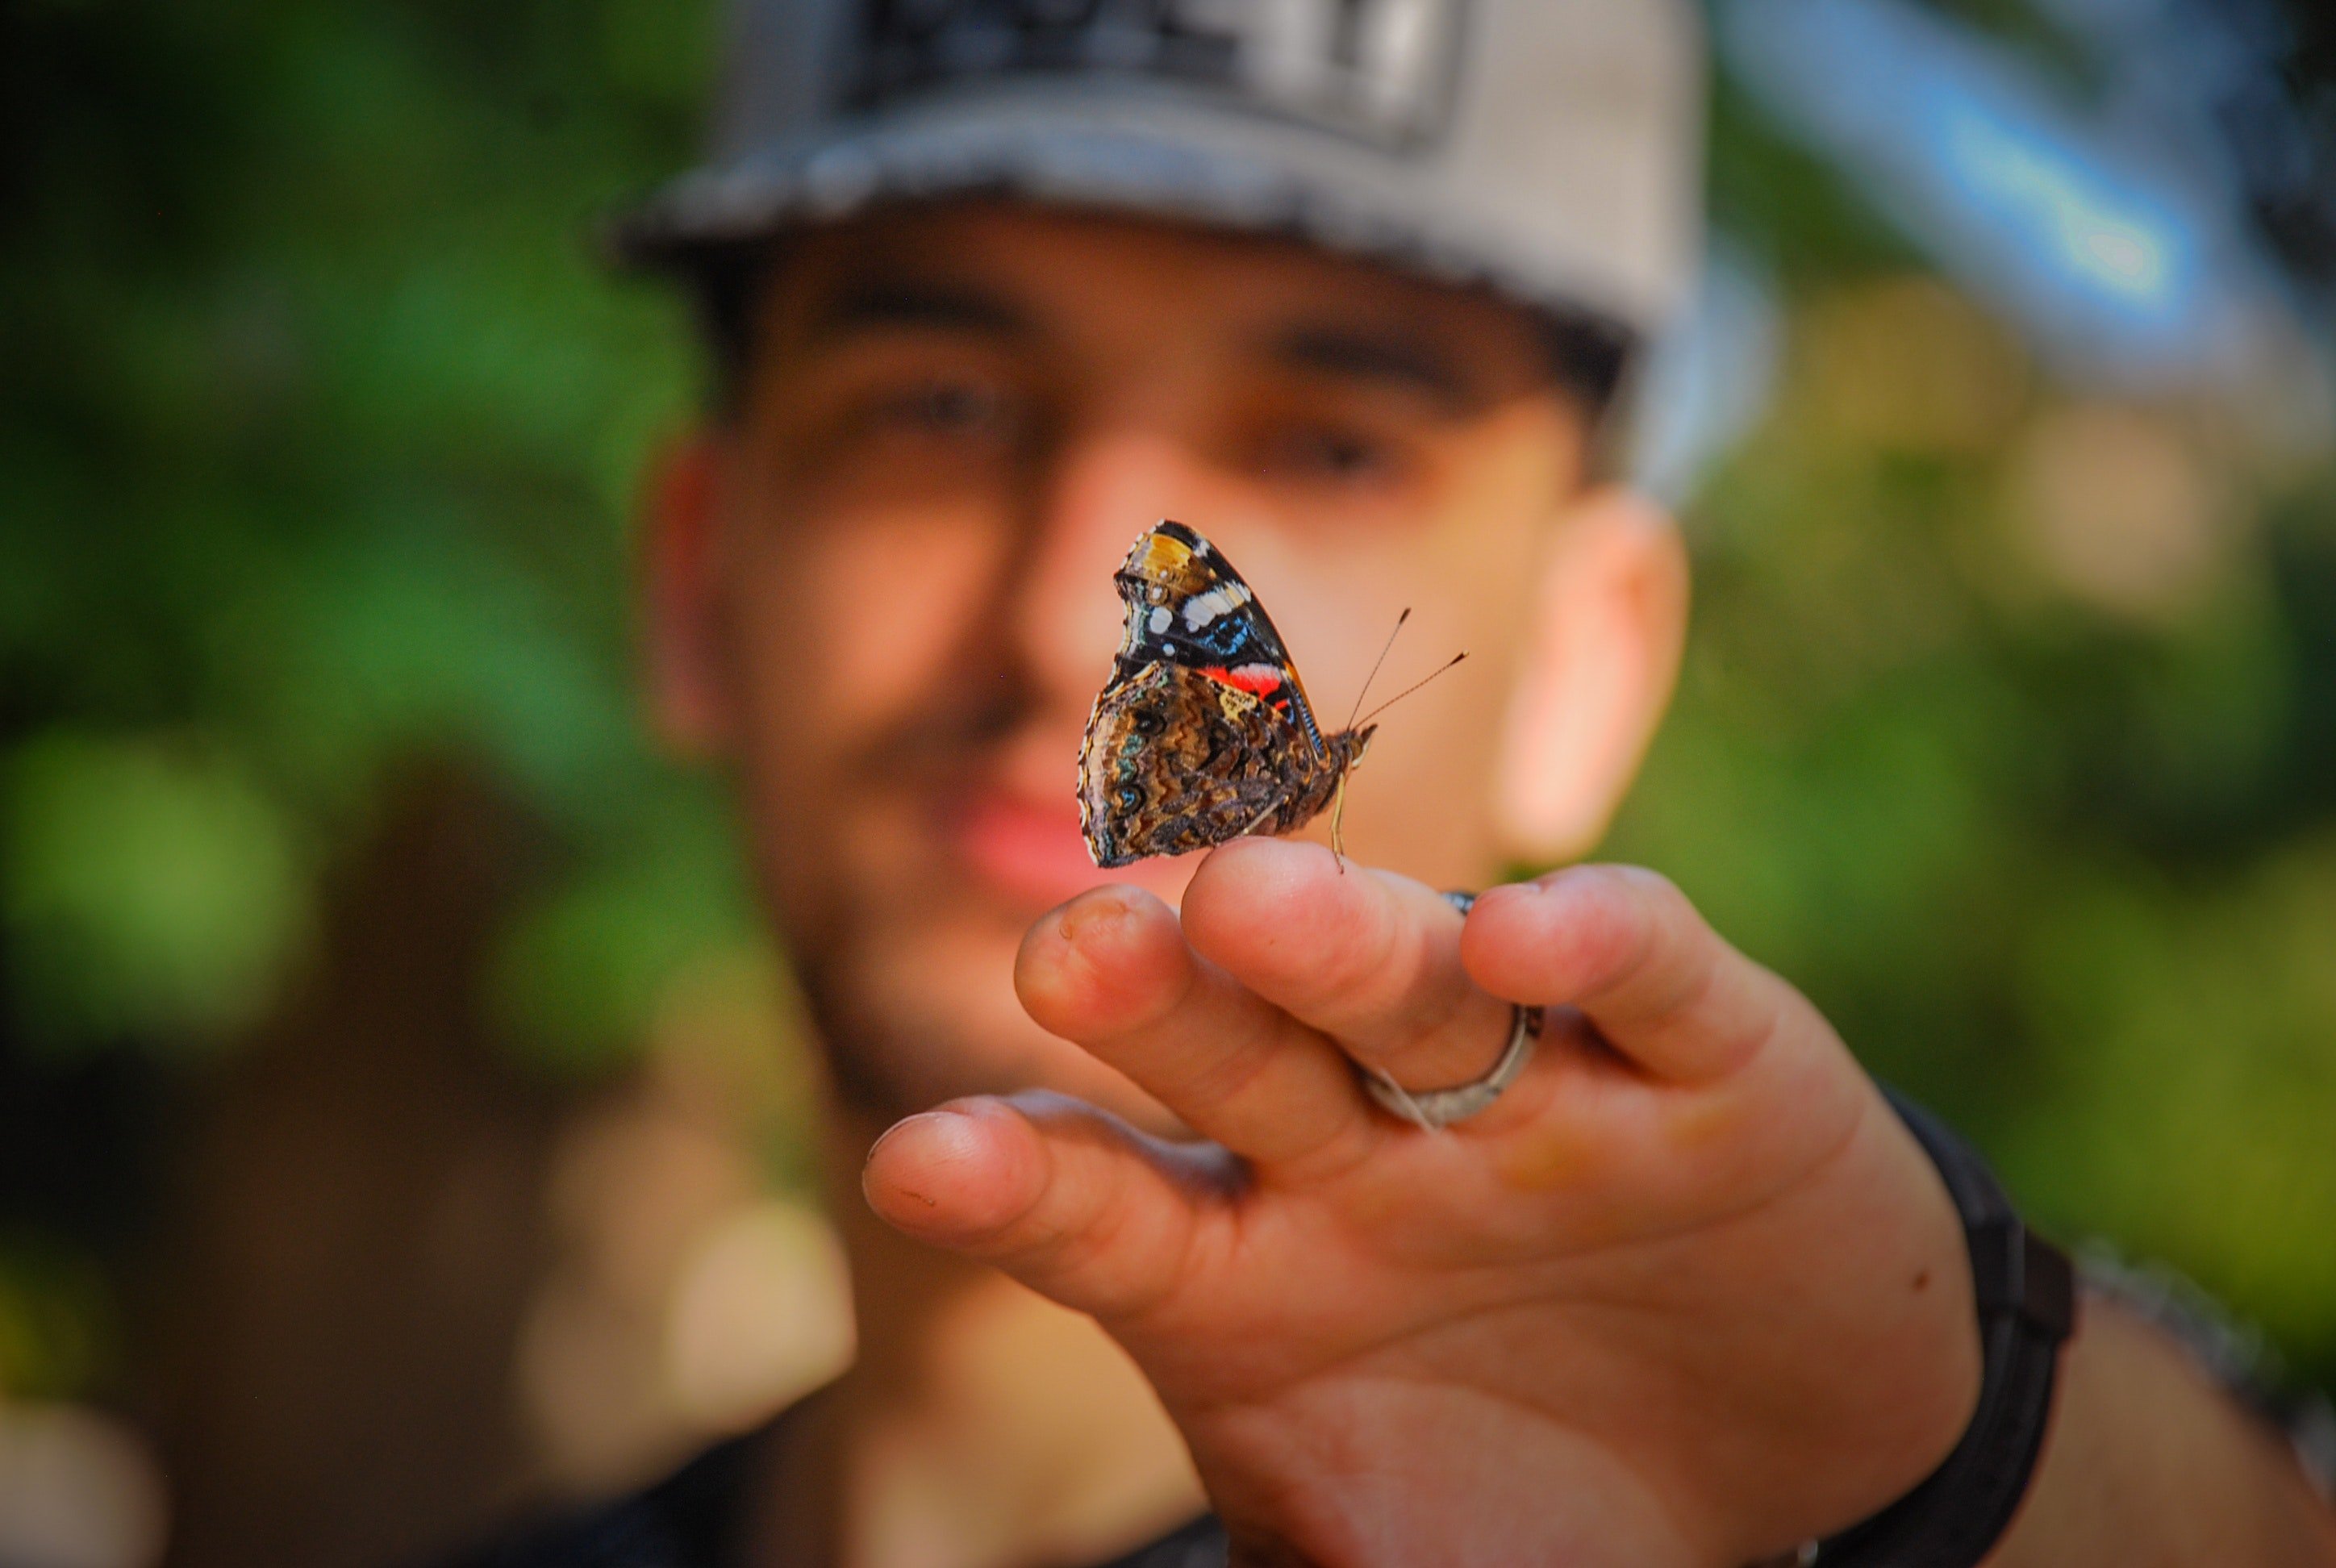 The butterfly lands on OP's uncle | Photo: Pexels